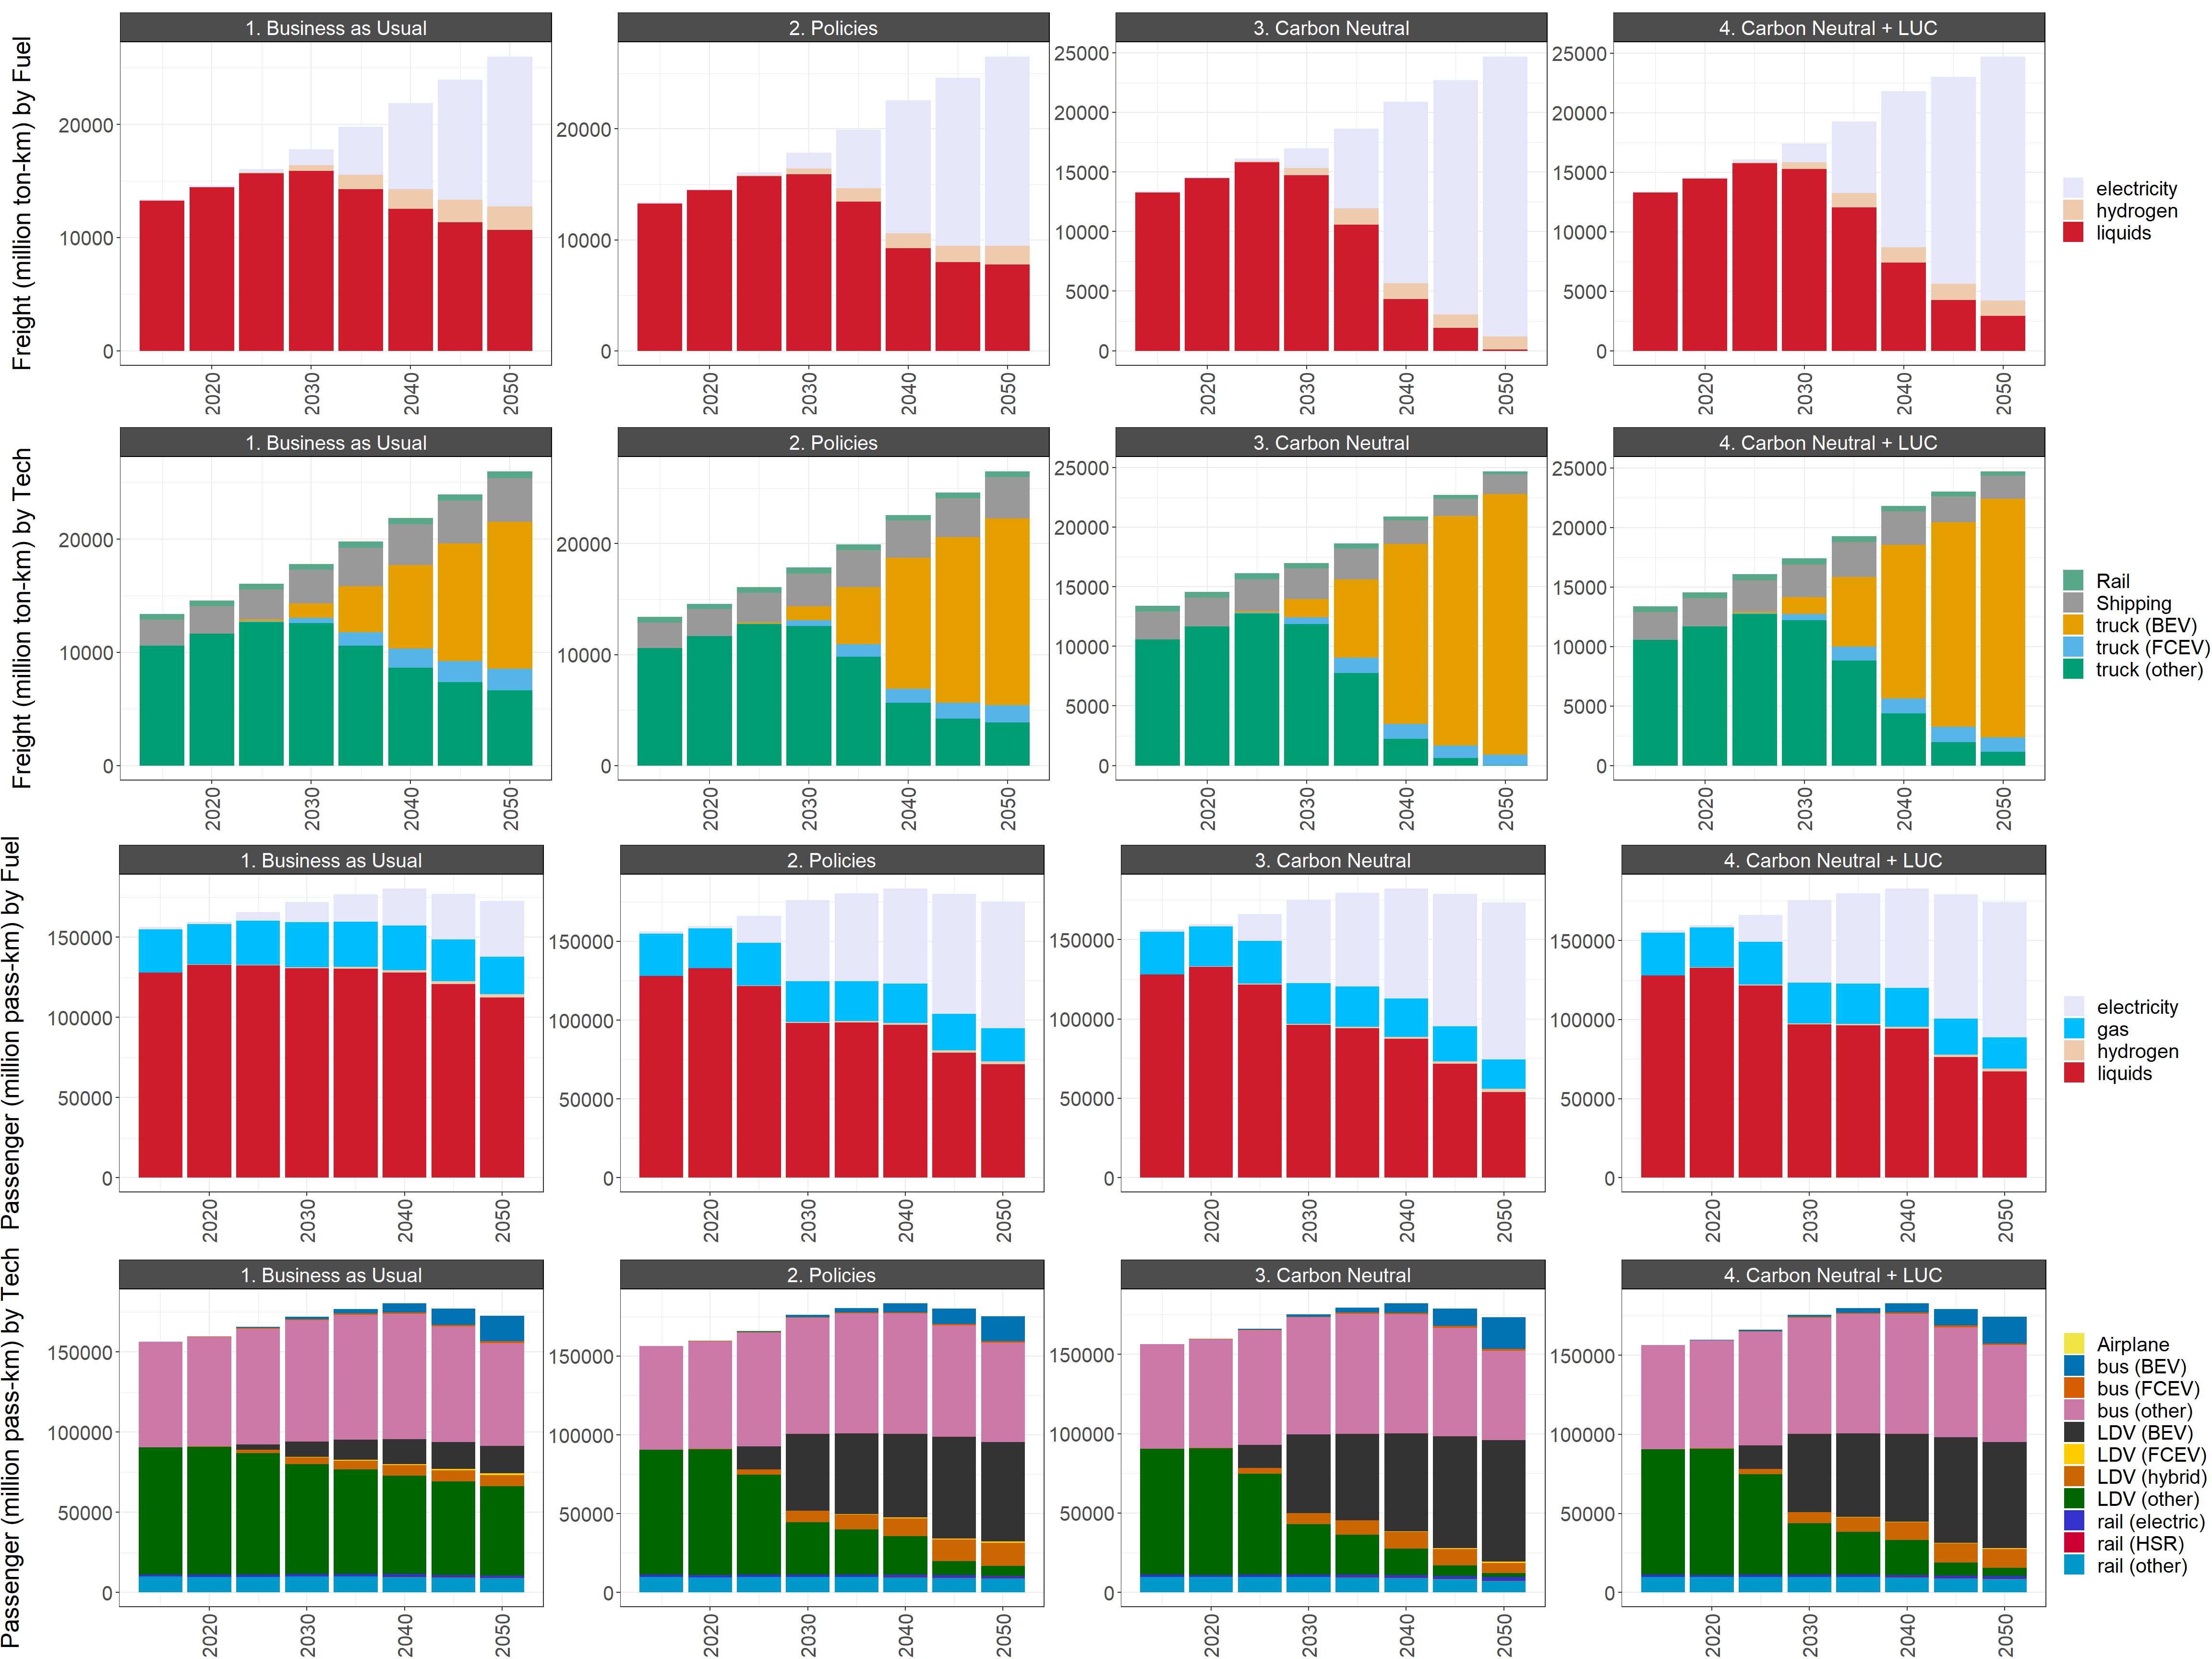 MEA area transportation GHG emissions by mode and service output by mode and fuel in the reference scenario and the low and high policies scenarios